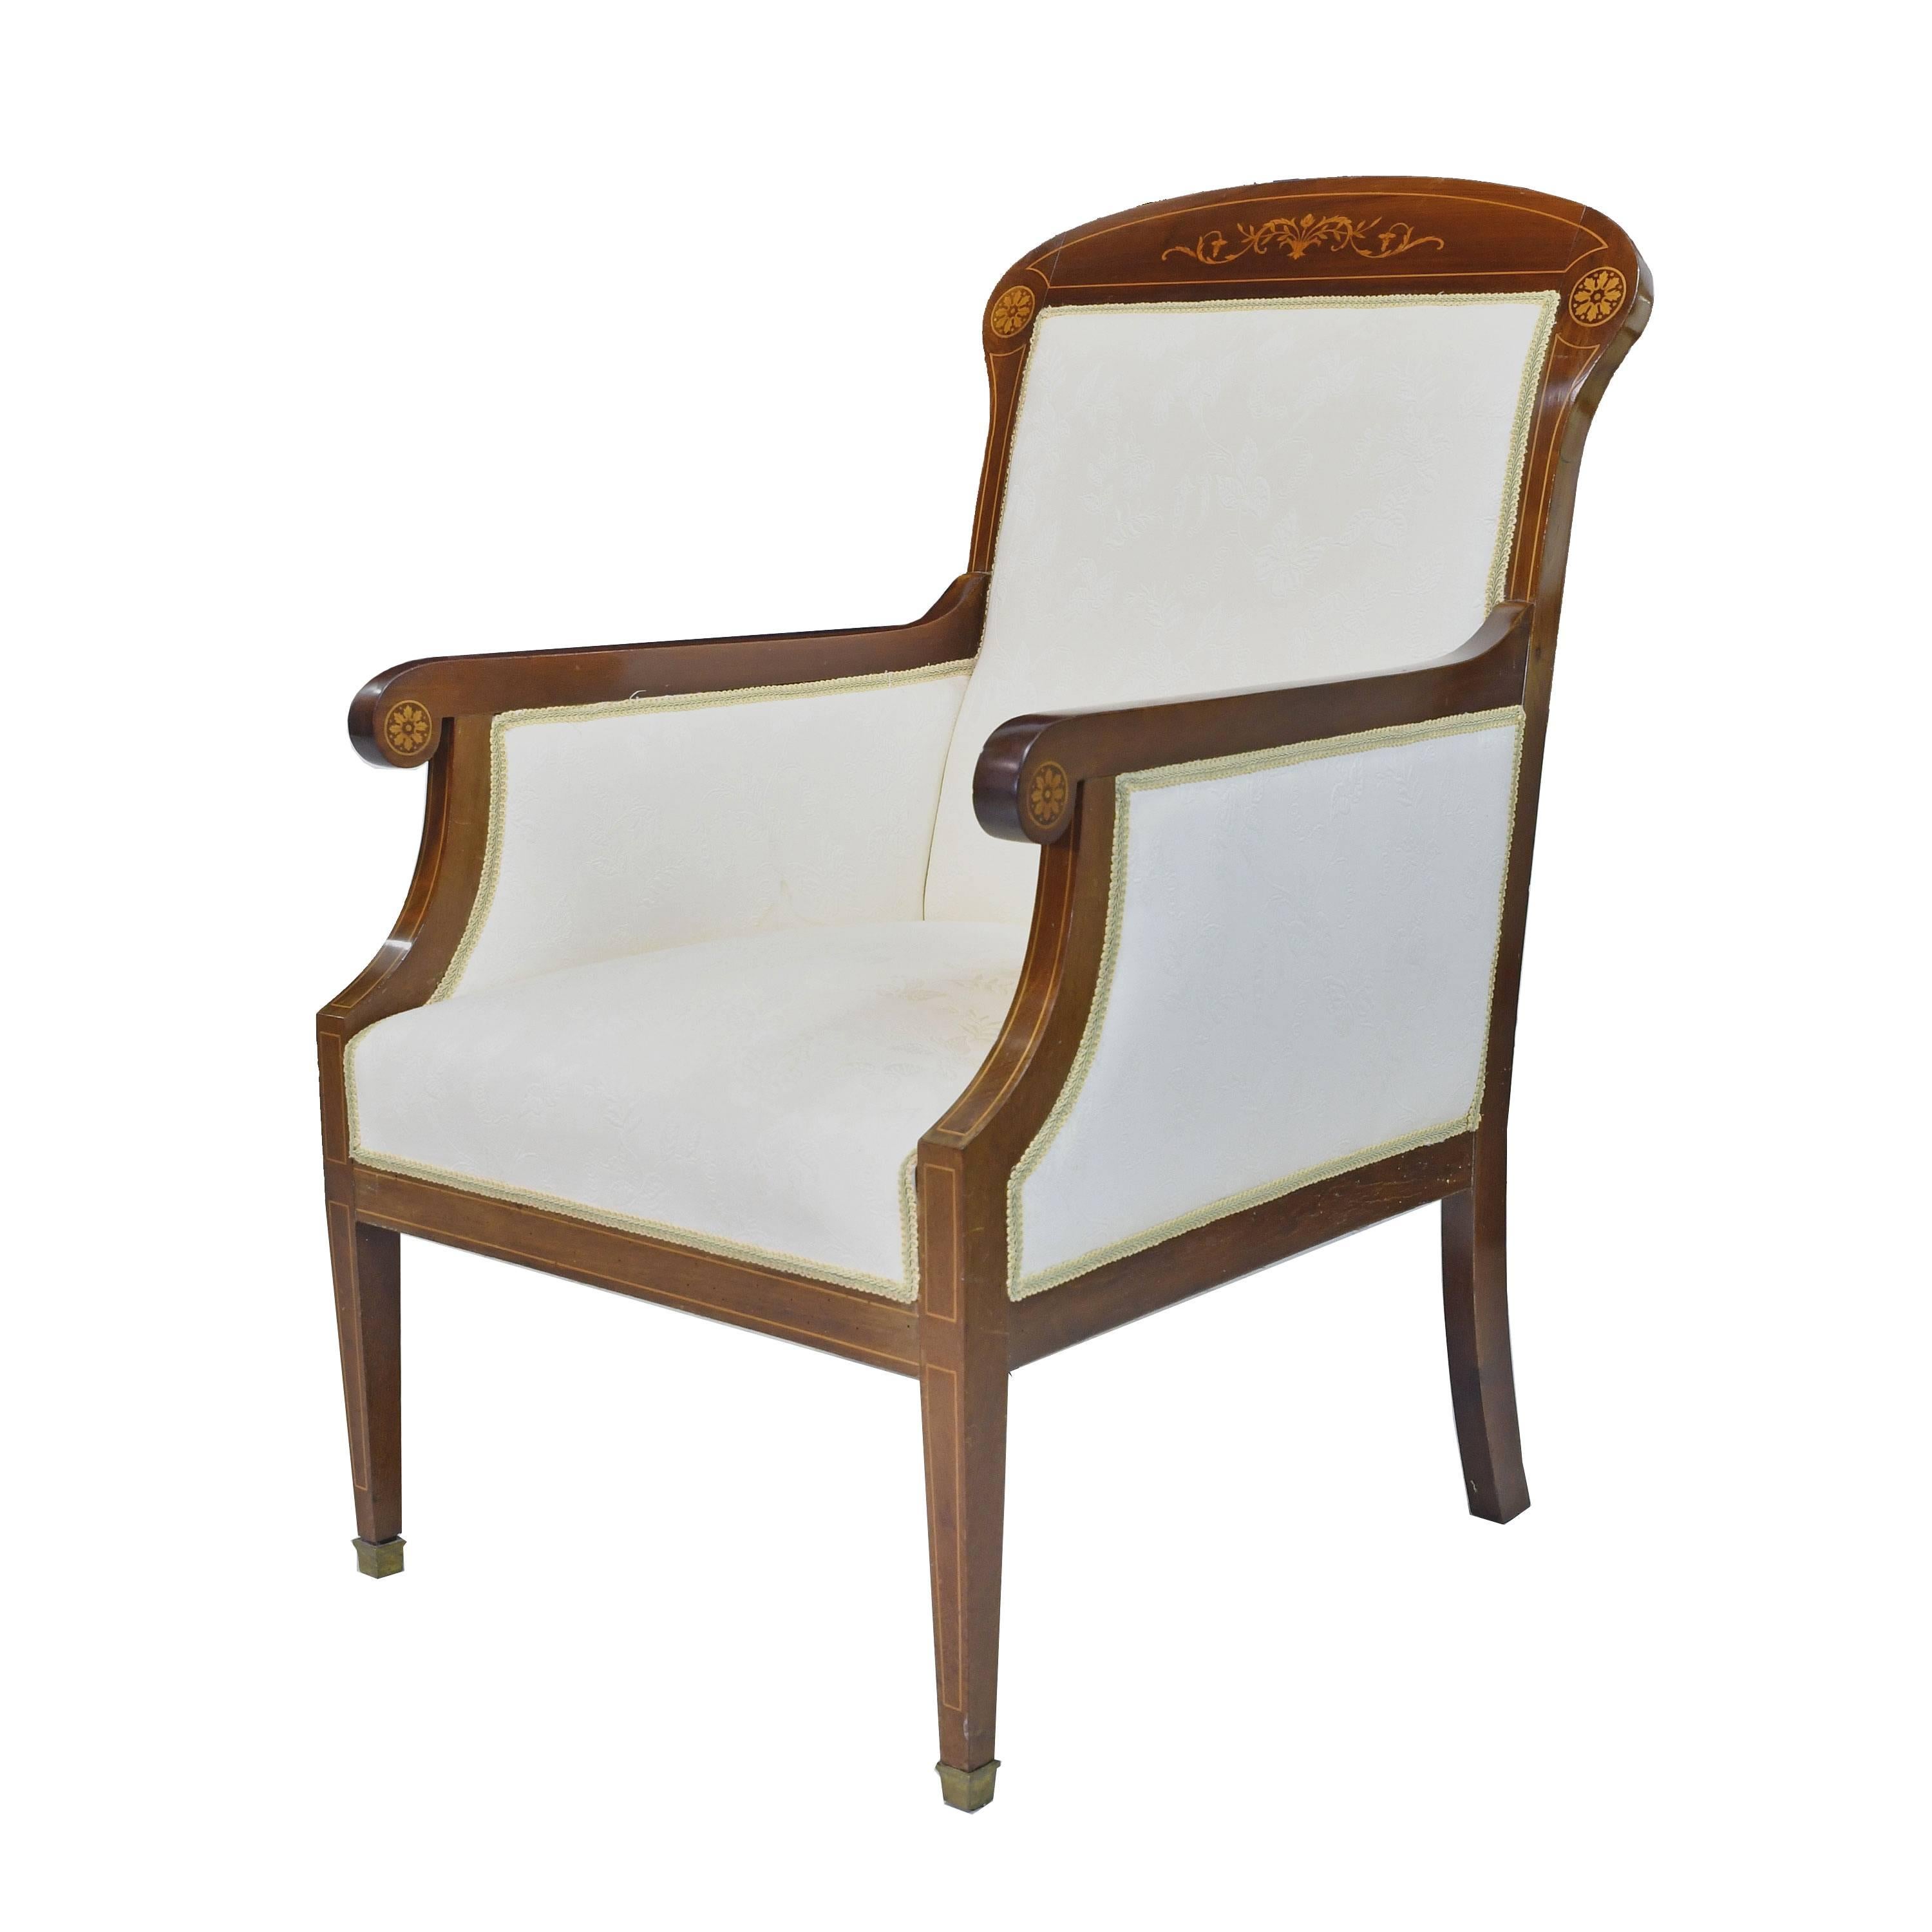 Upholstery Pair of Art Deco Danish Bergères in West Indies Mahogany with Inlays, circa 1910